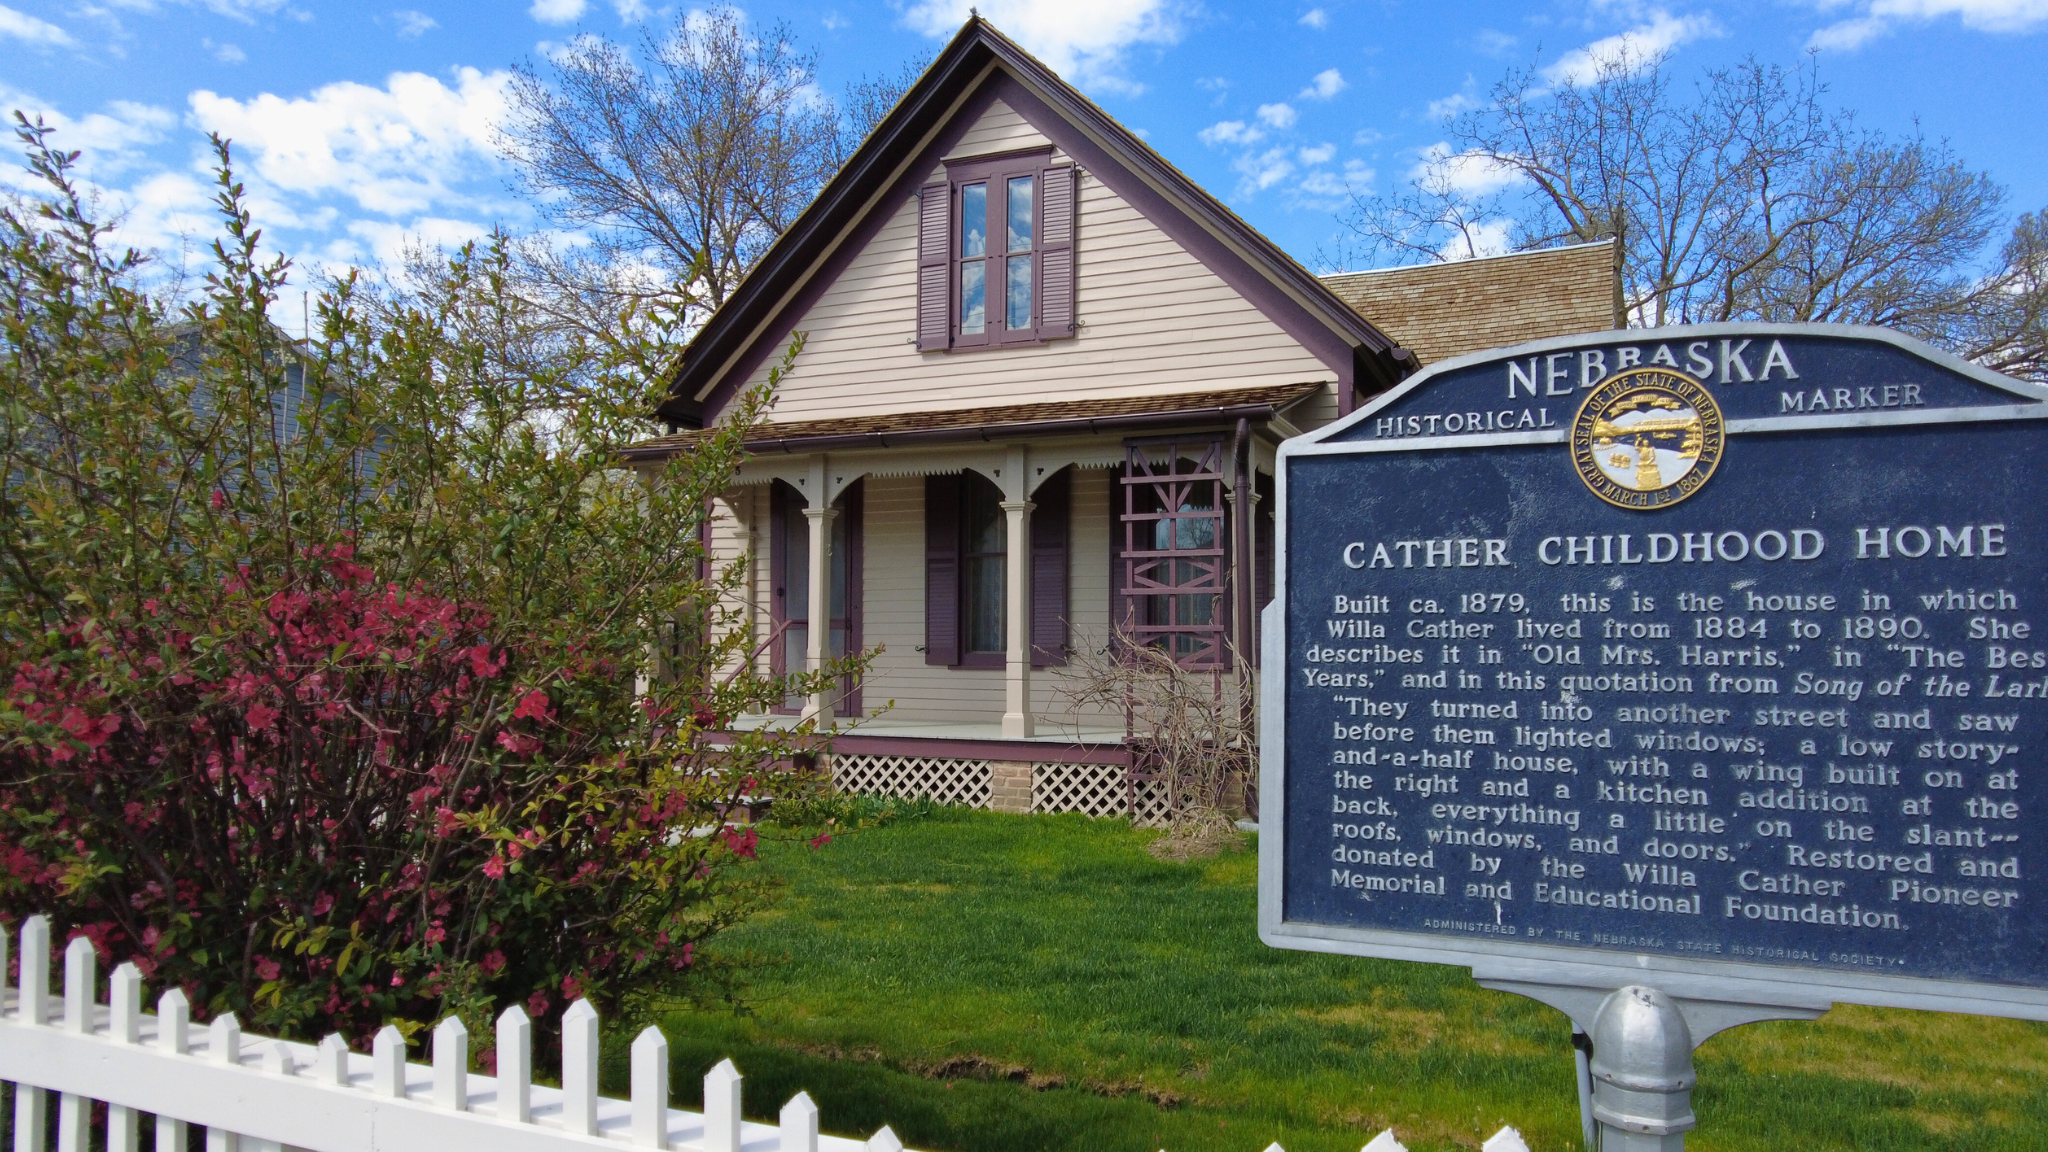 Willa Cather Childhood Home